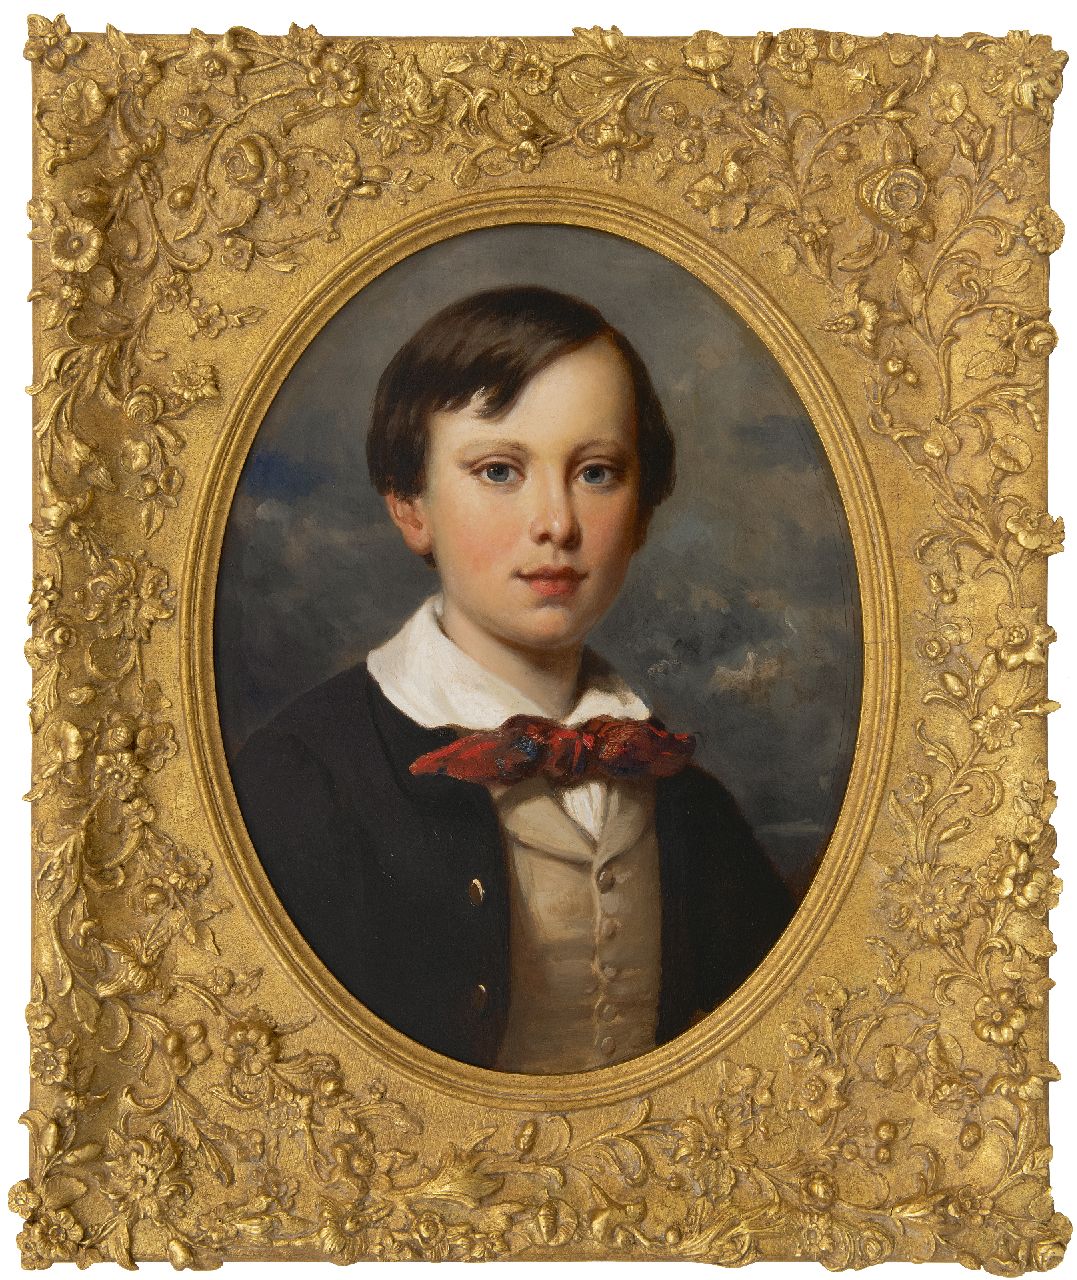 Pieneman N.  | Nicolaas Pieneman | Paintings offered for sale | Portrait of the Dutch Crown Prince Wiwill, oil on panel 51.6 x 37.3 cm, painted ca. 1852-1853